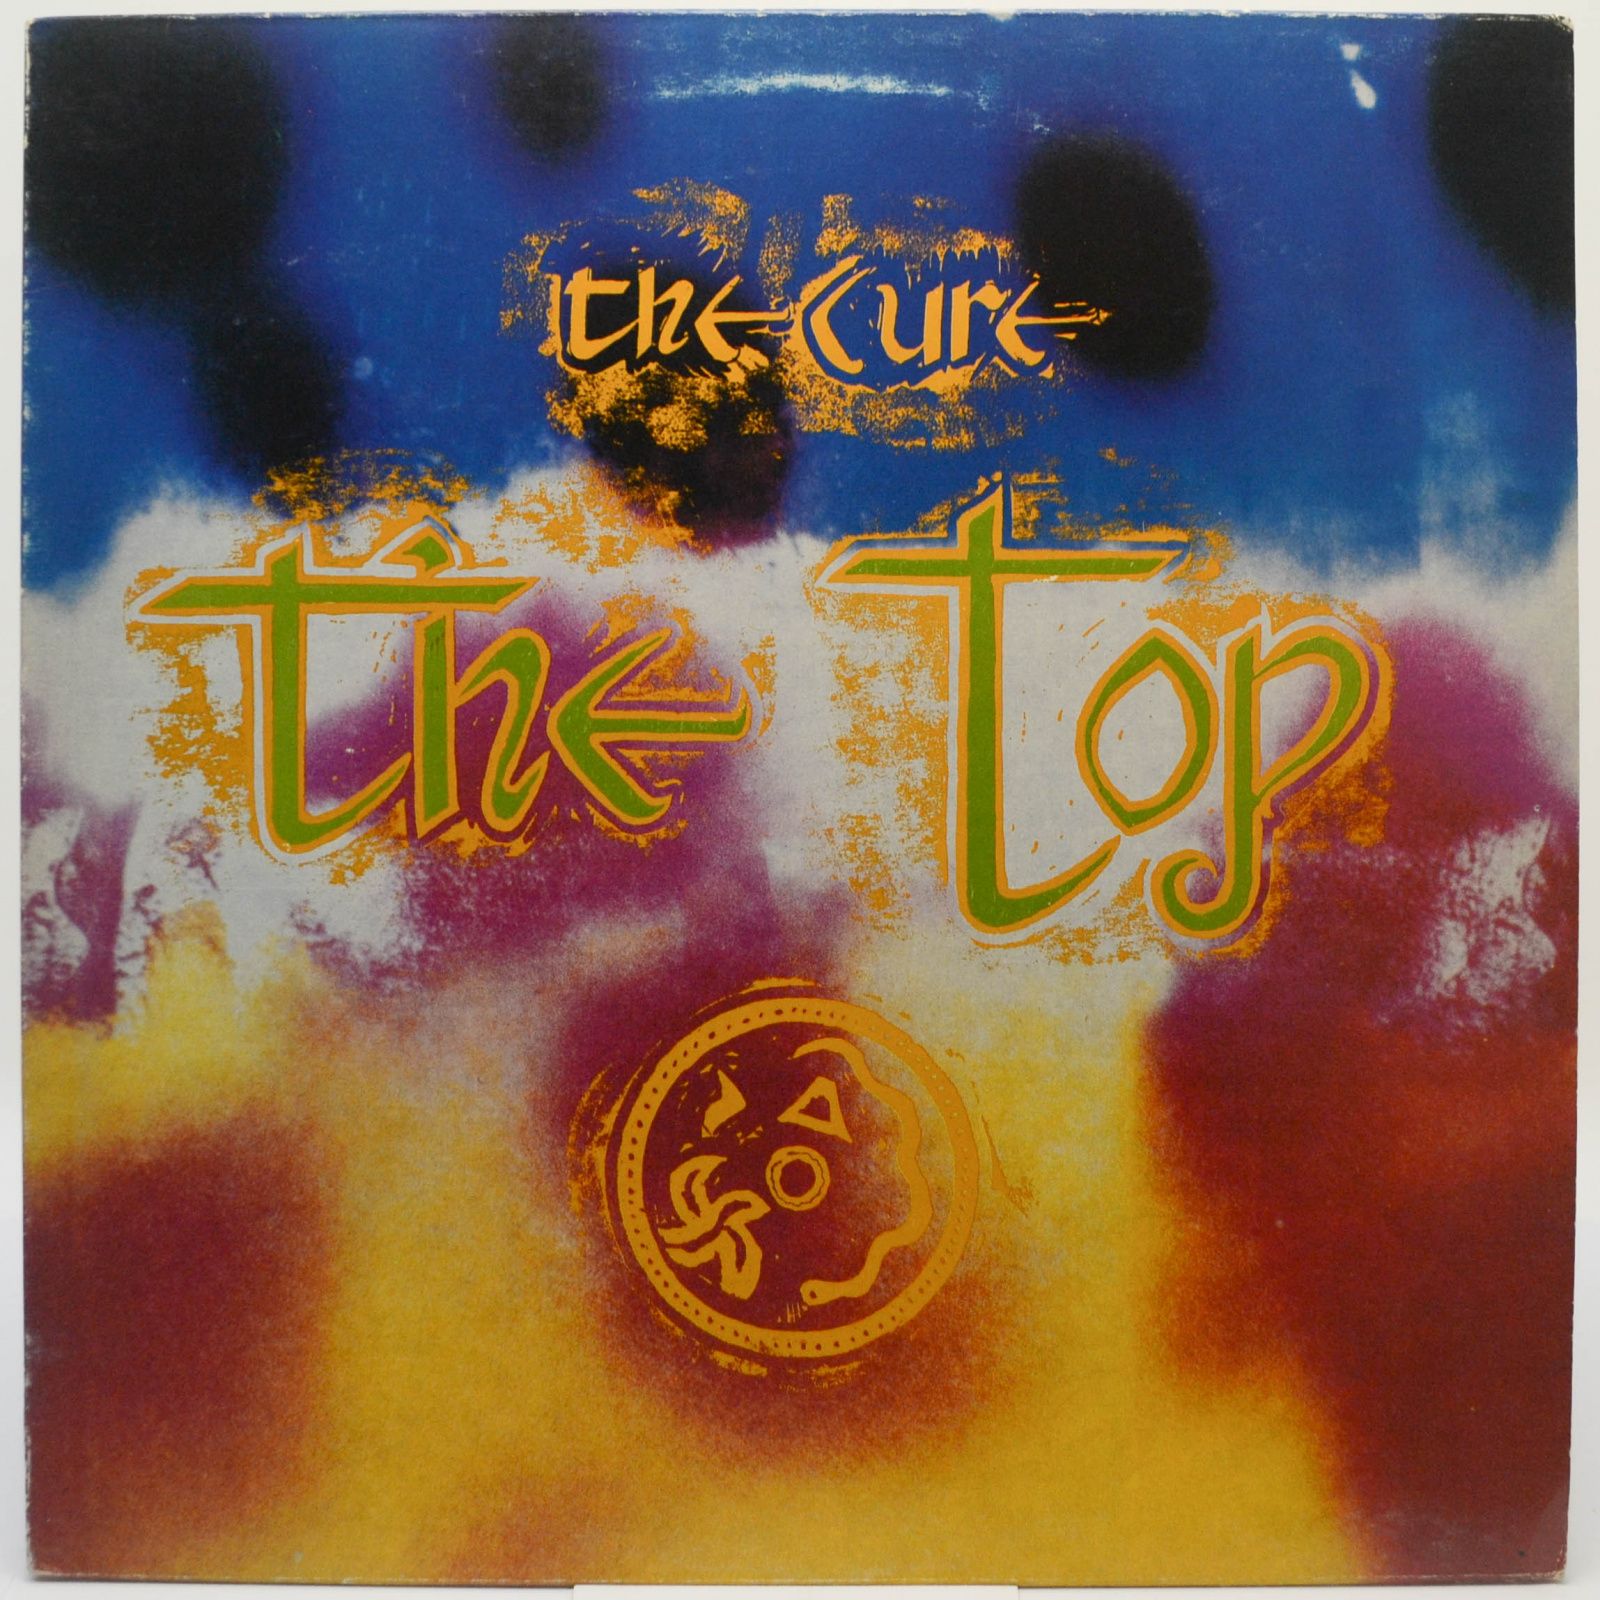 The Top, 1984